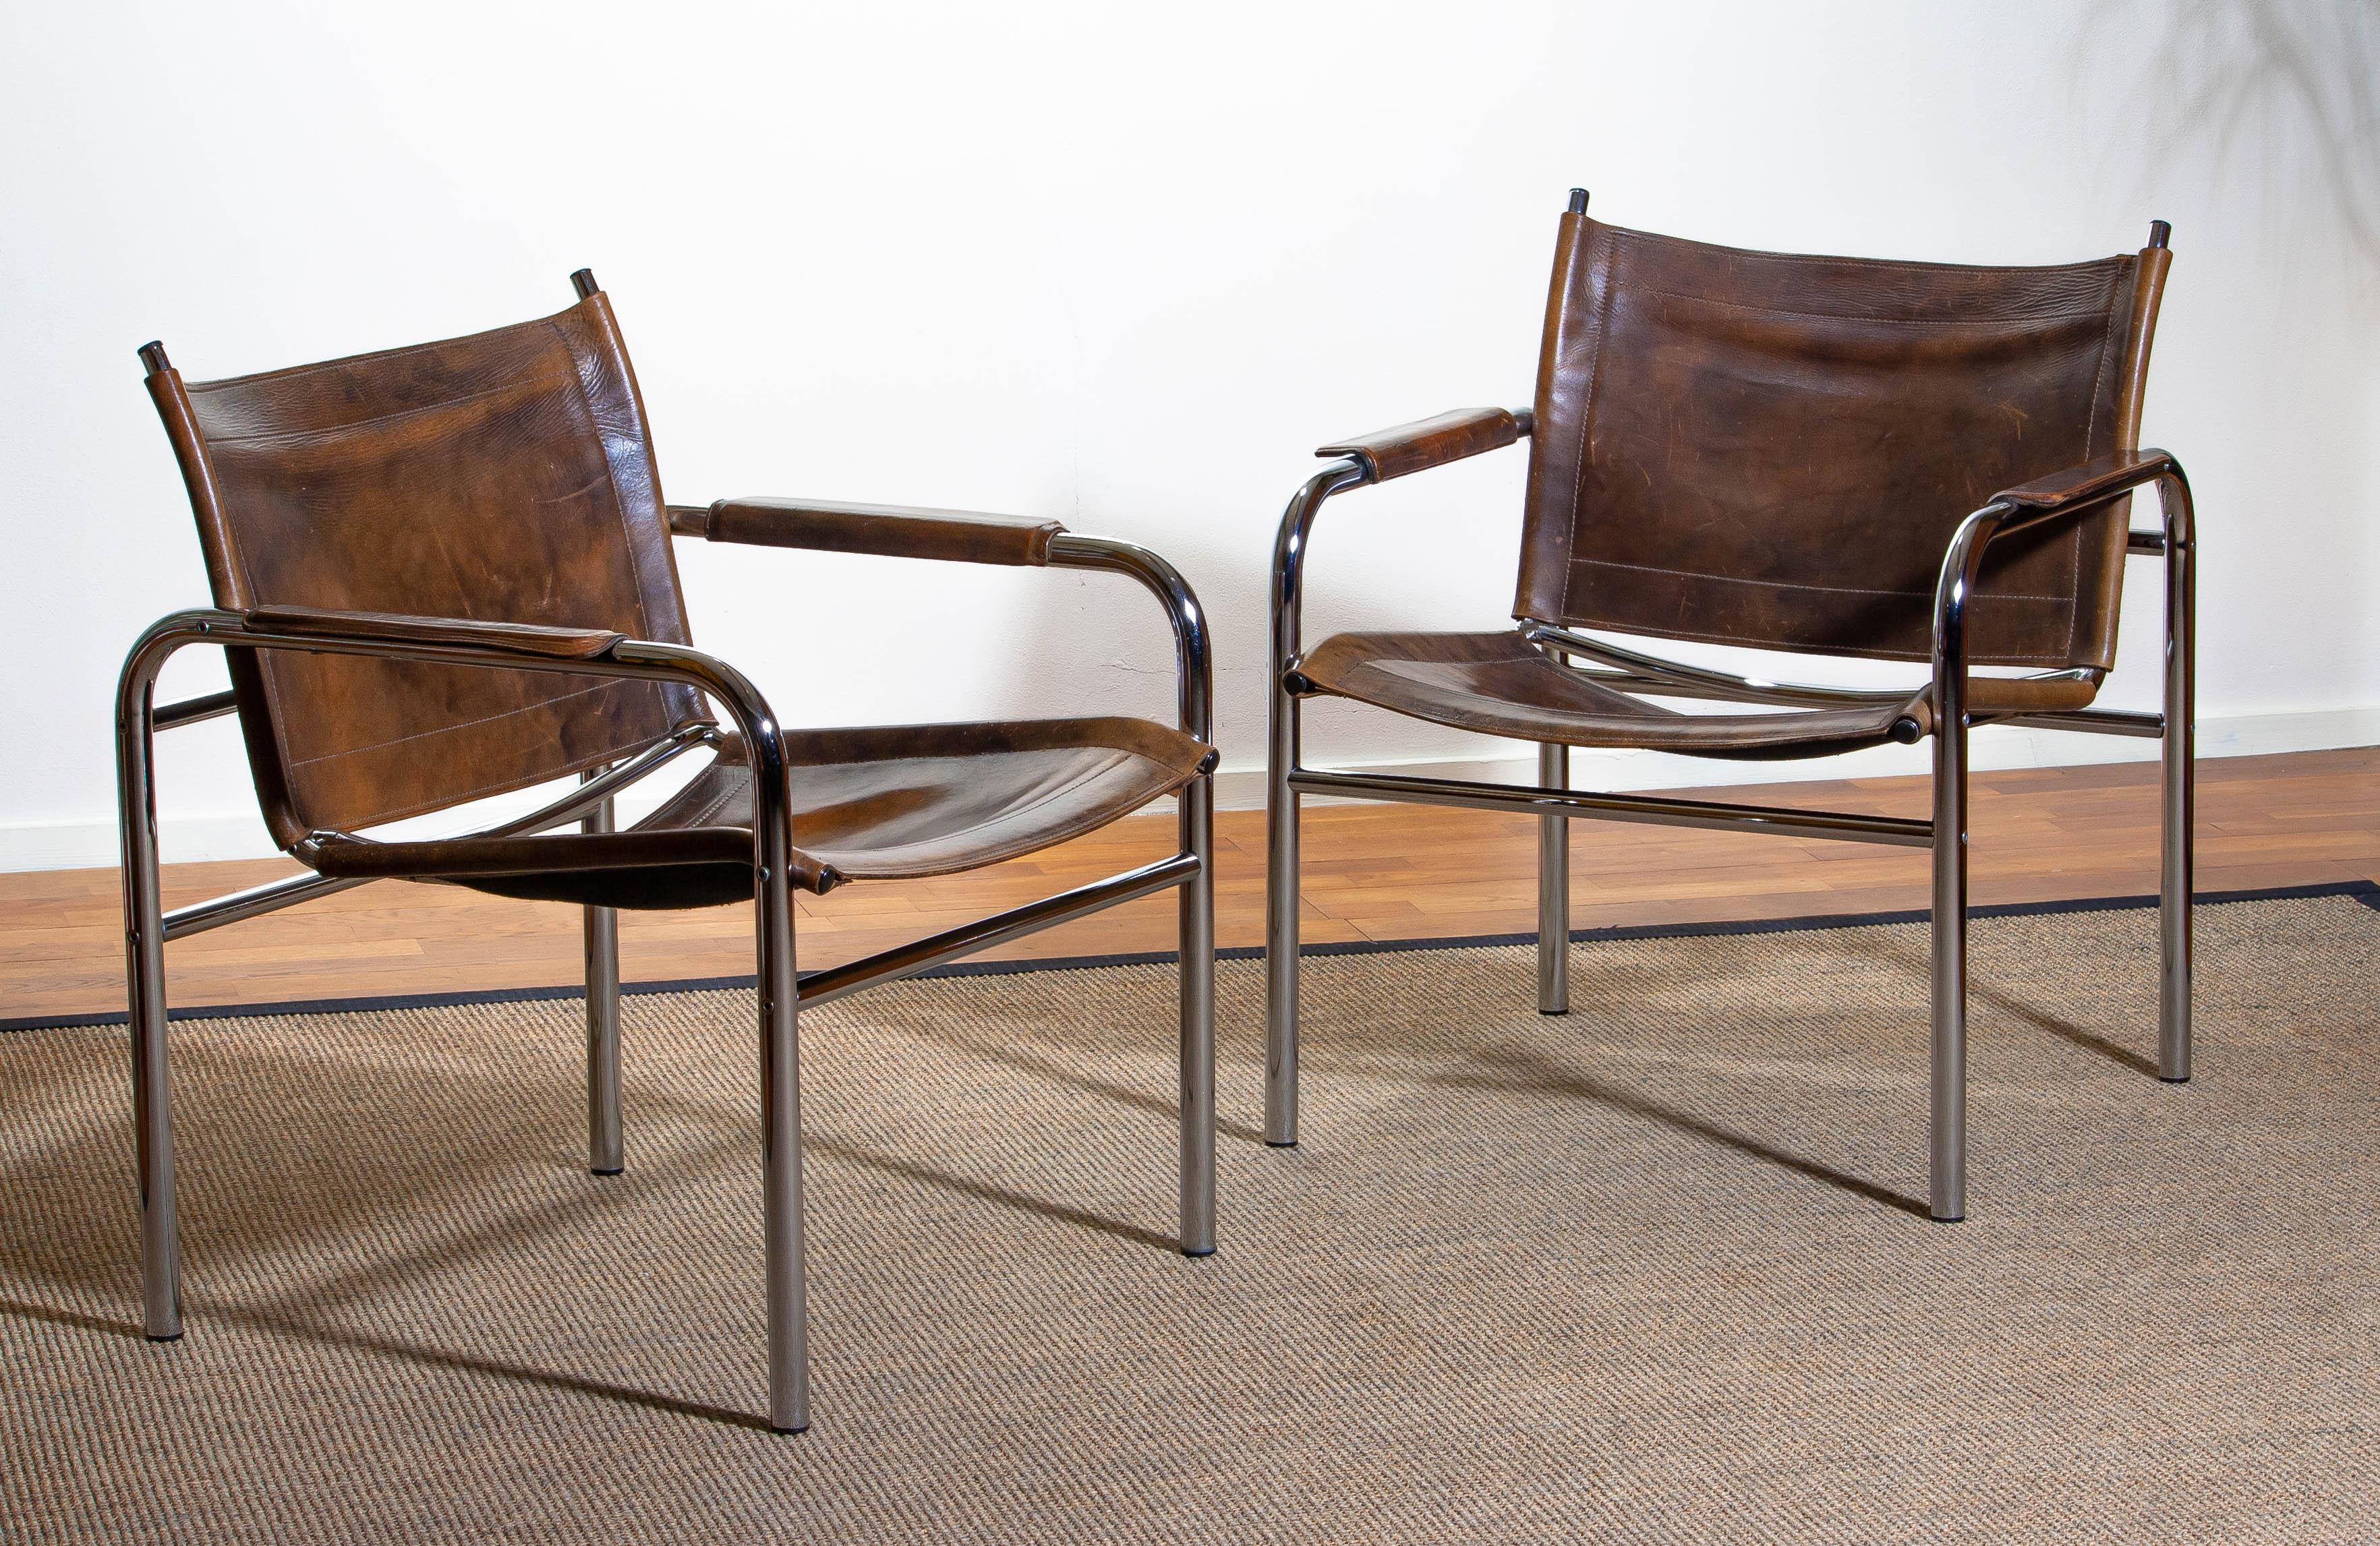 Swedish 1980s, Pair of Leather and Tubular Steel Armchairs by Tord Bjorklund, Sweden 